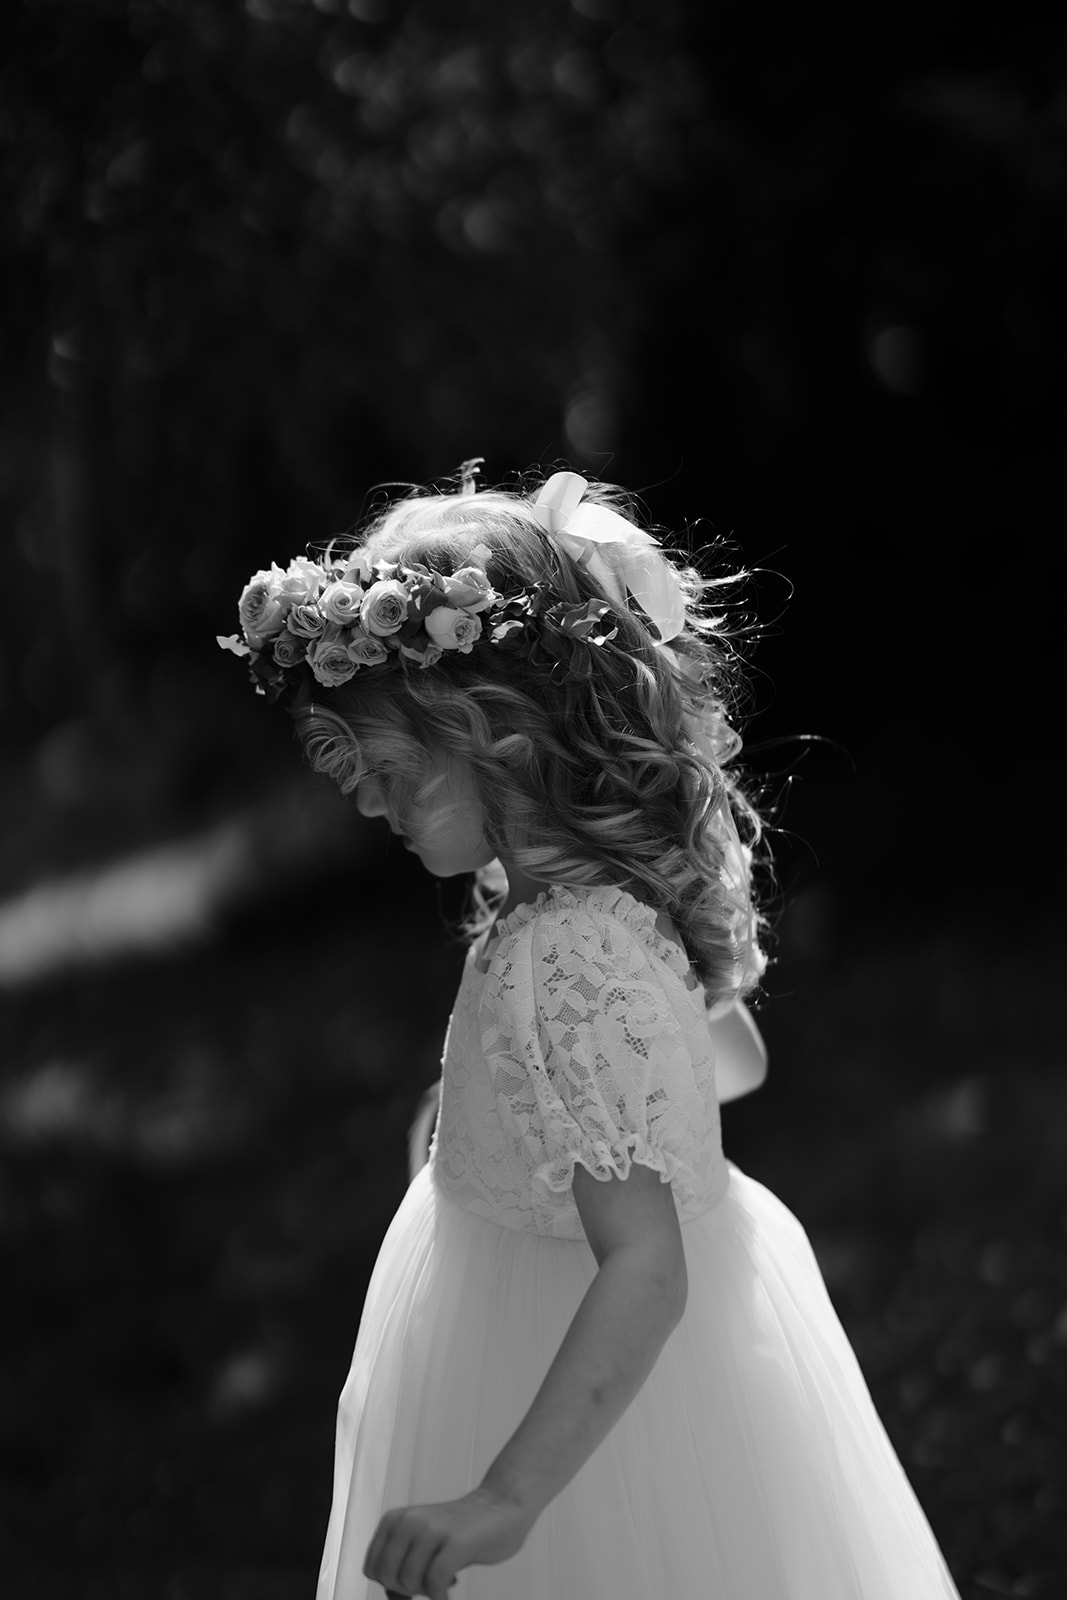 Flower girl proudly displaying her handmade flower crown at Montsalvat